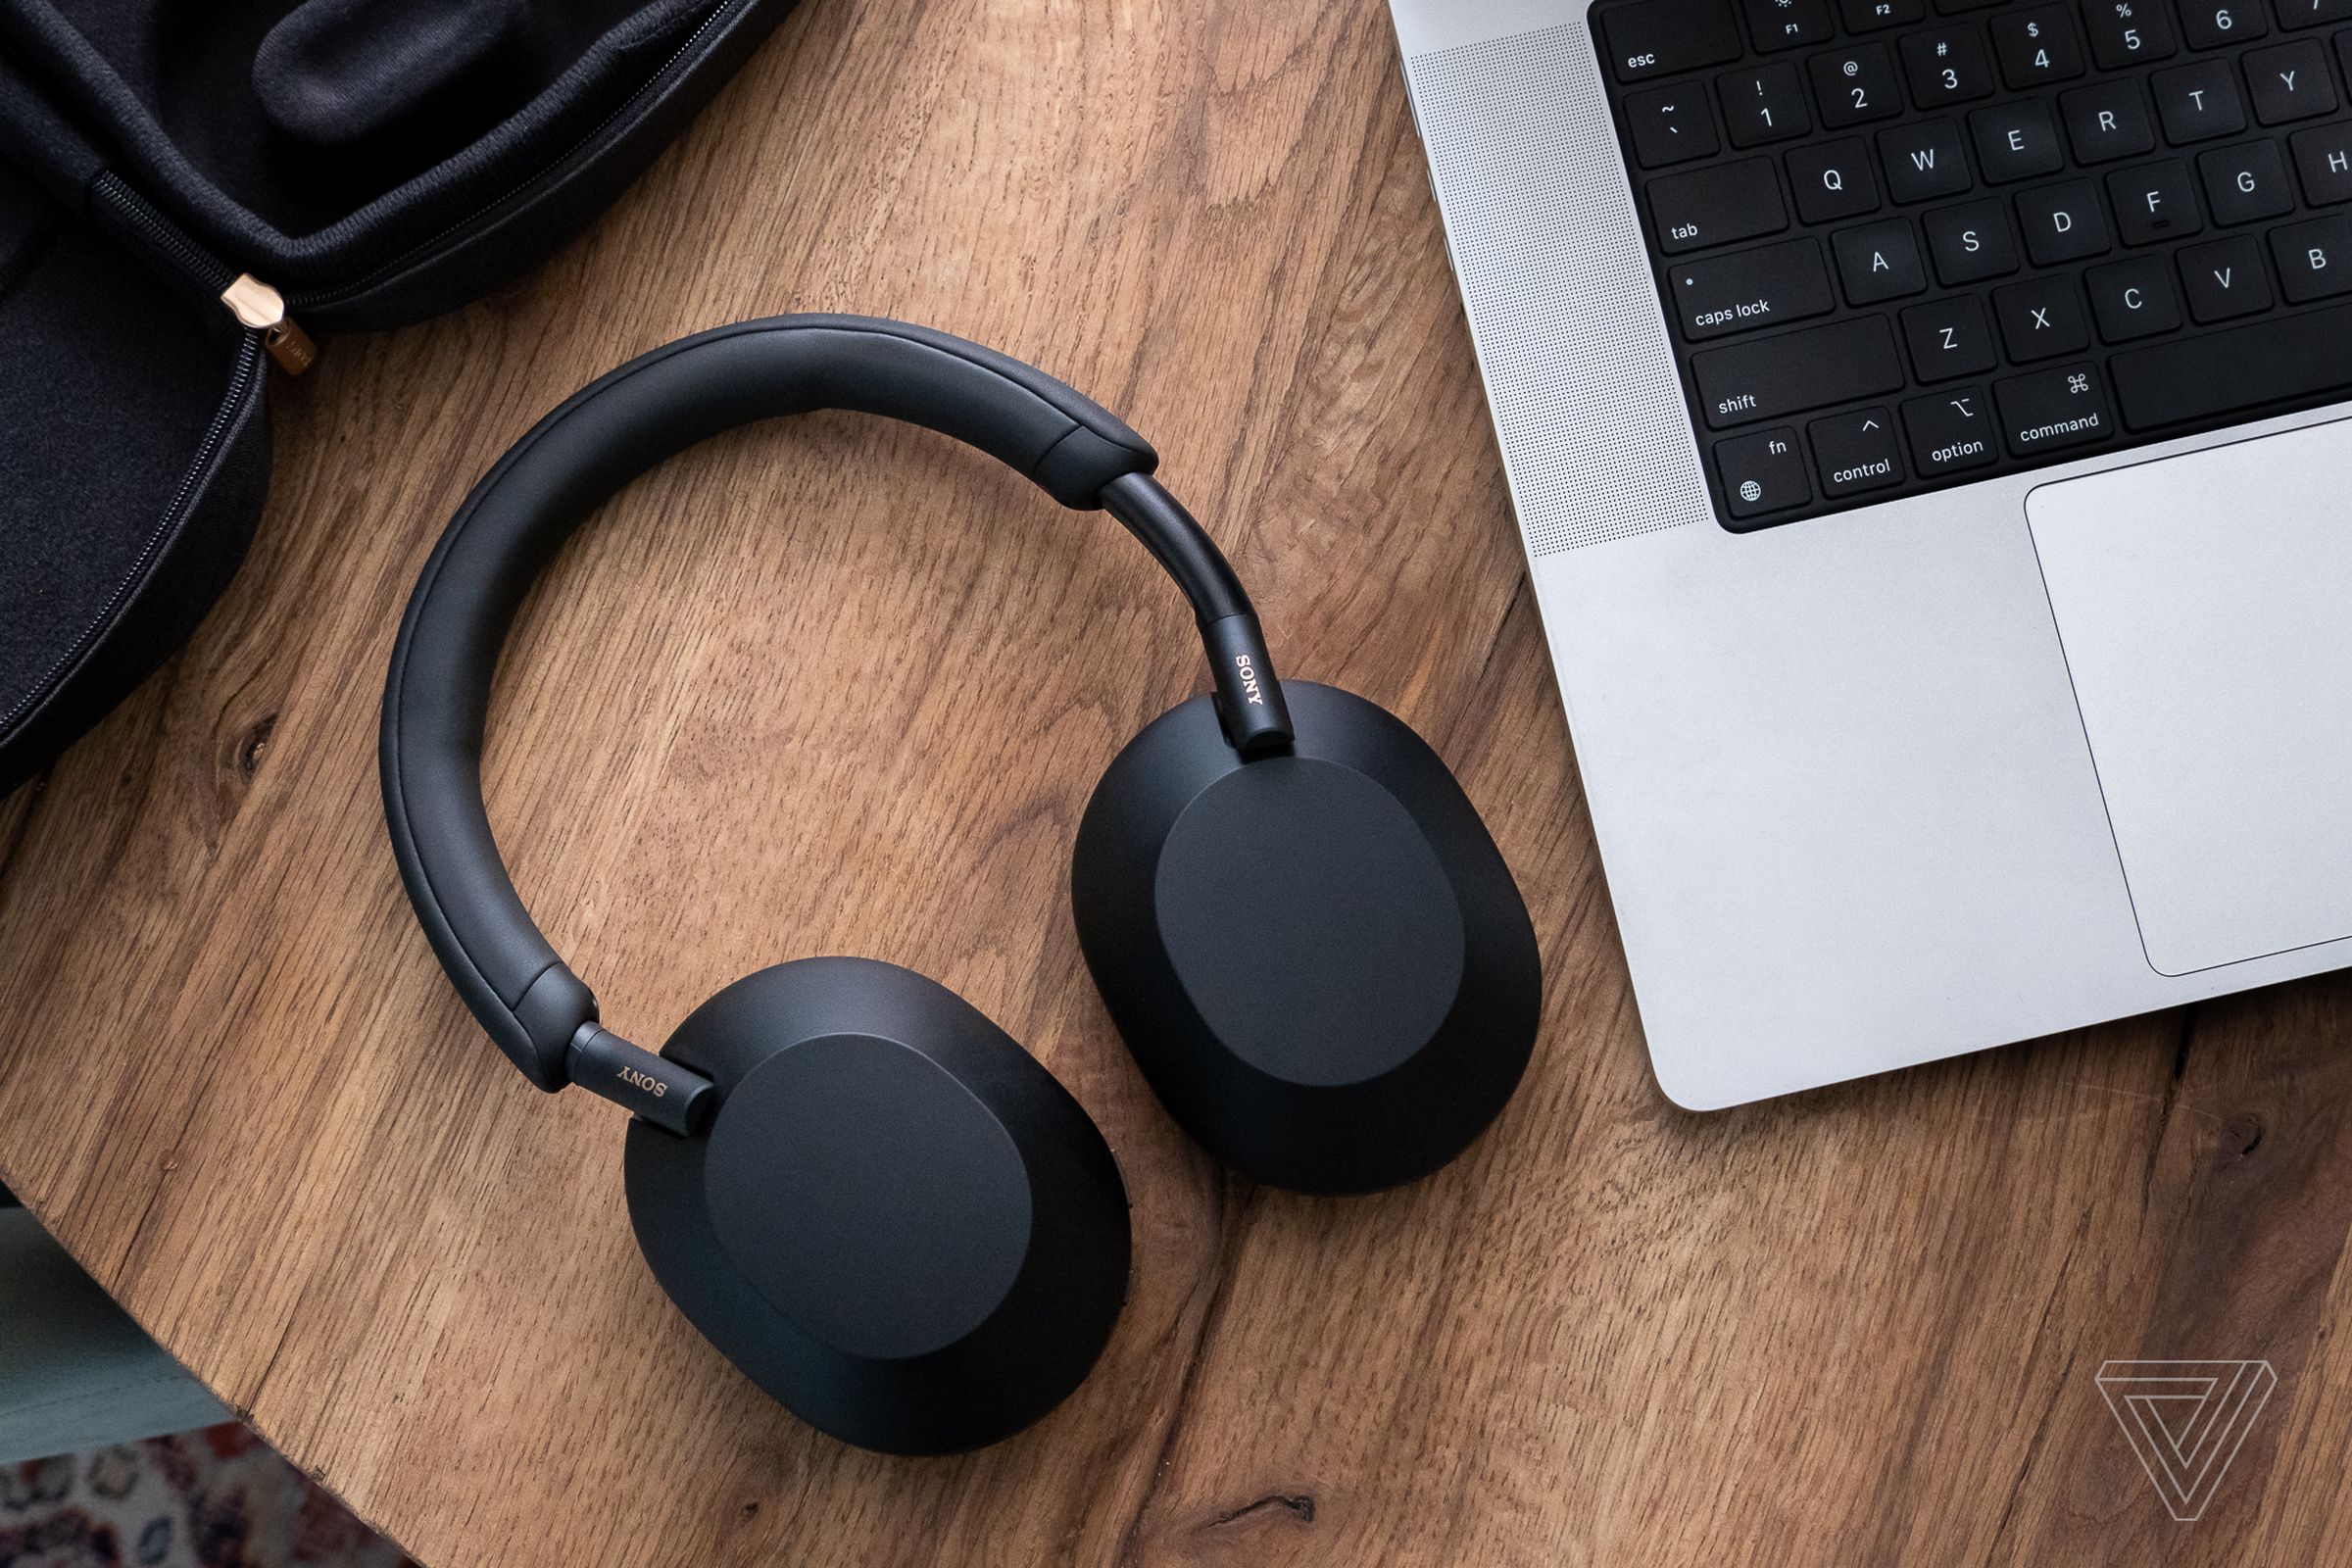 Sony’s WH-1000XM5 headphones have an all-new design.